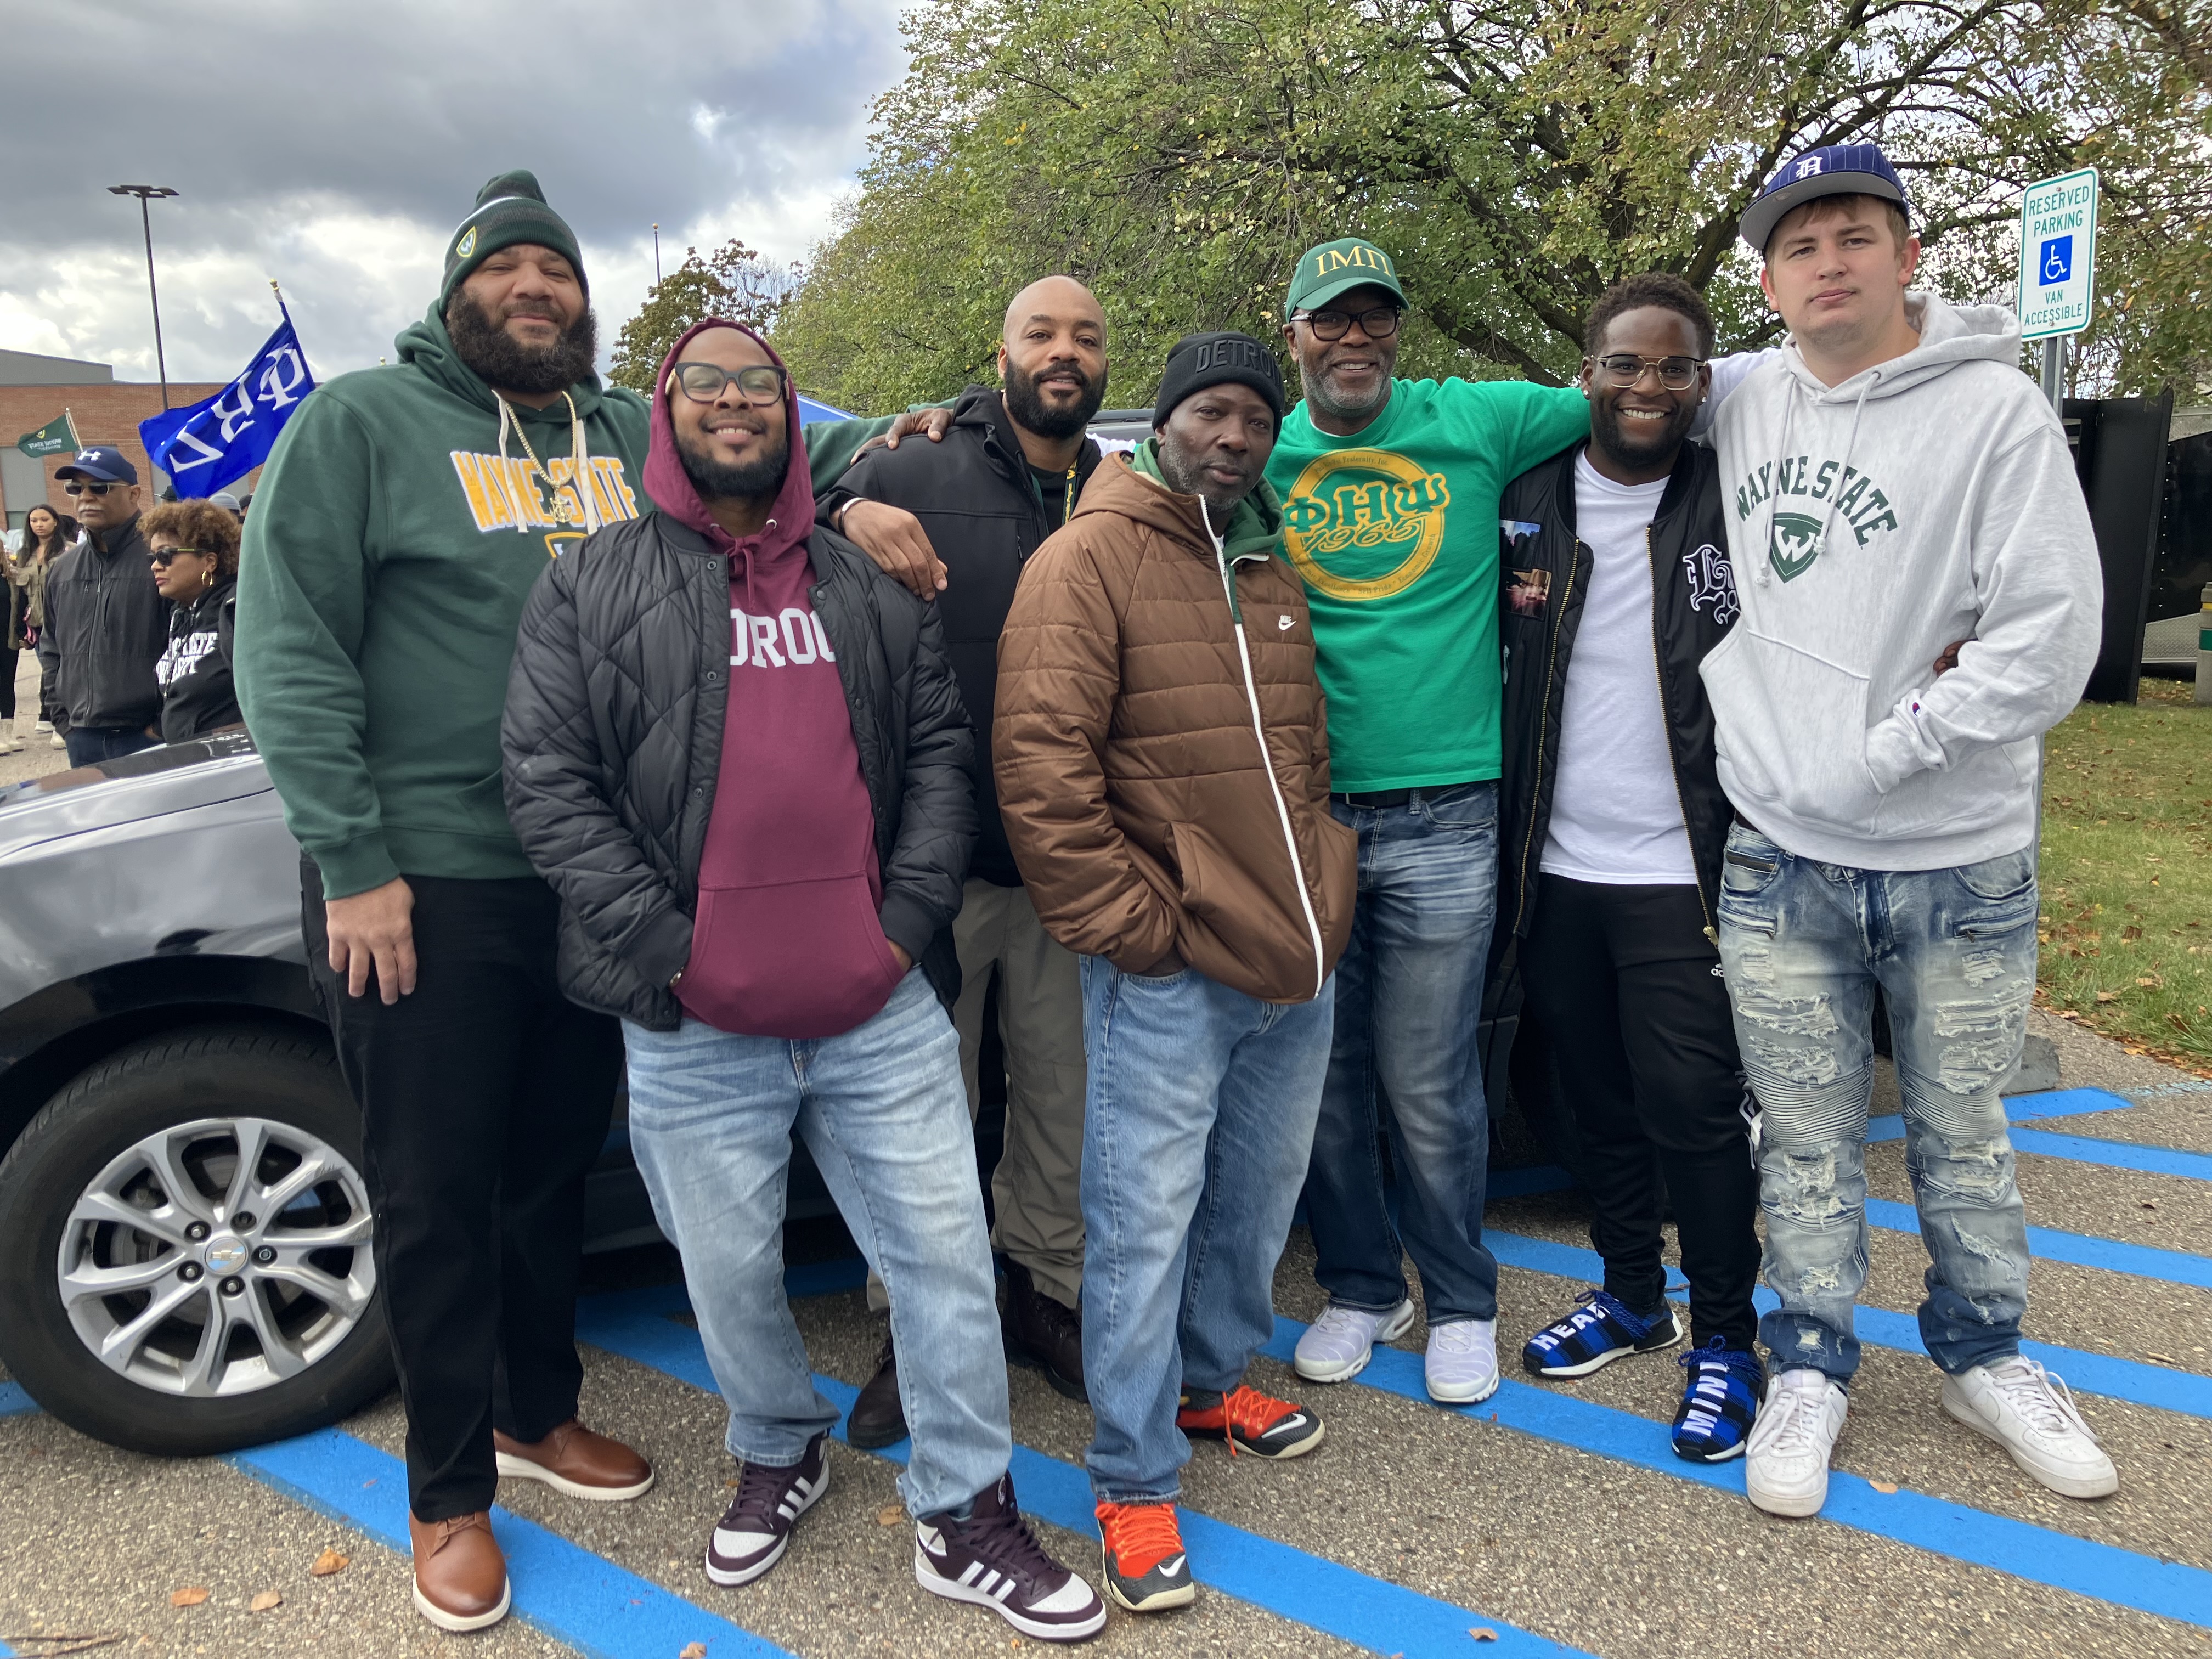 Seven men standing together in front of a car